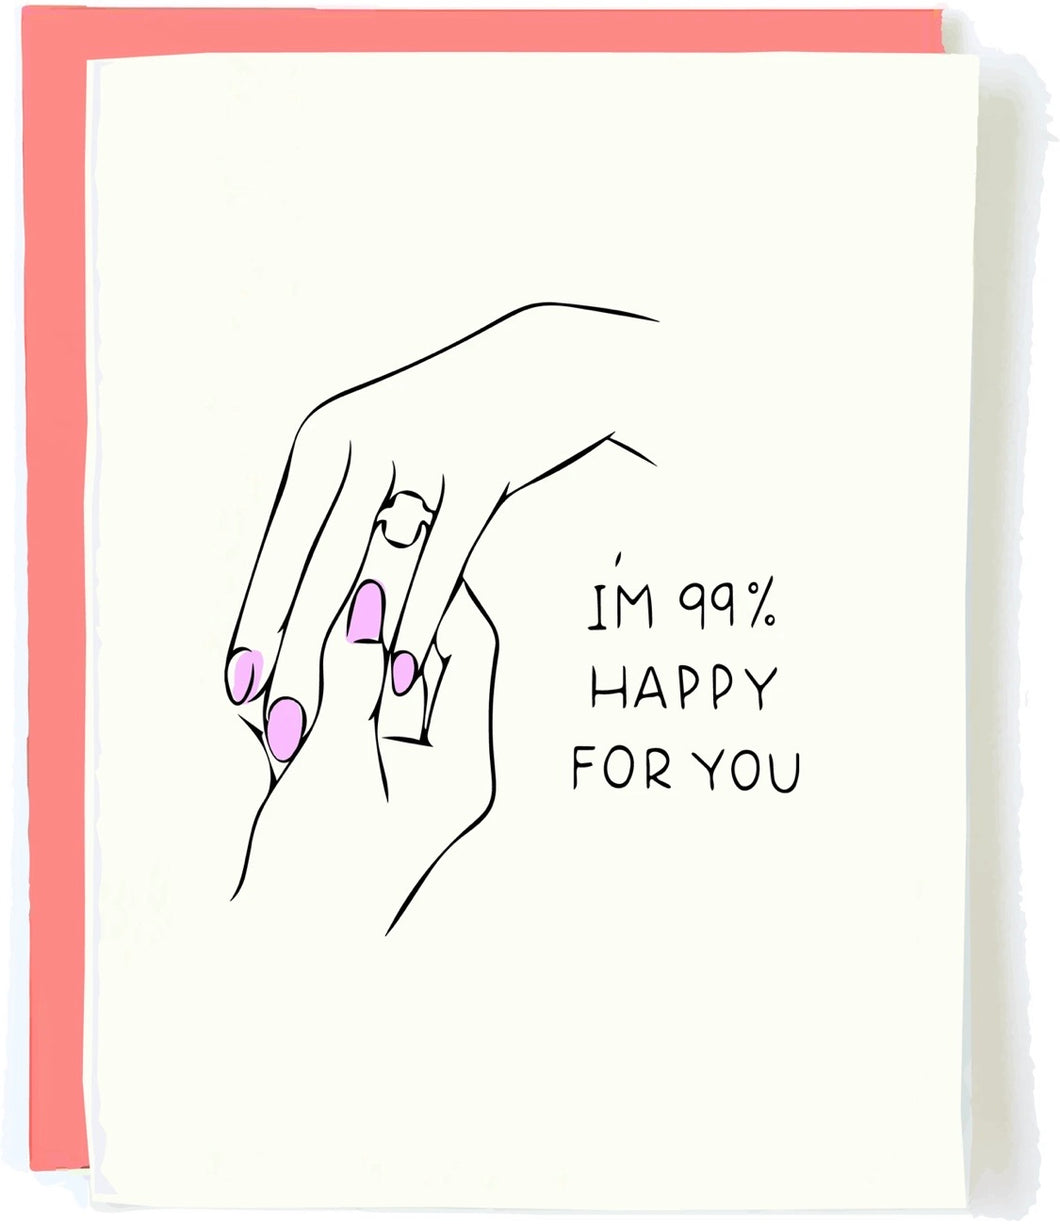 I’m 99% Happy For You Greeting Card